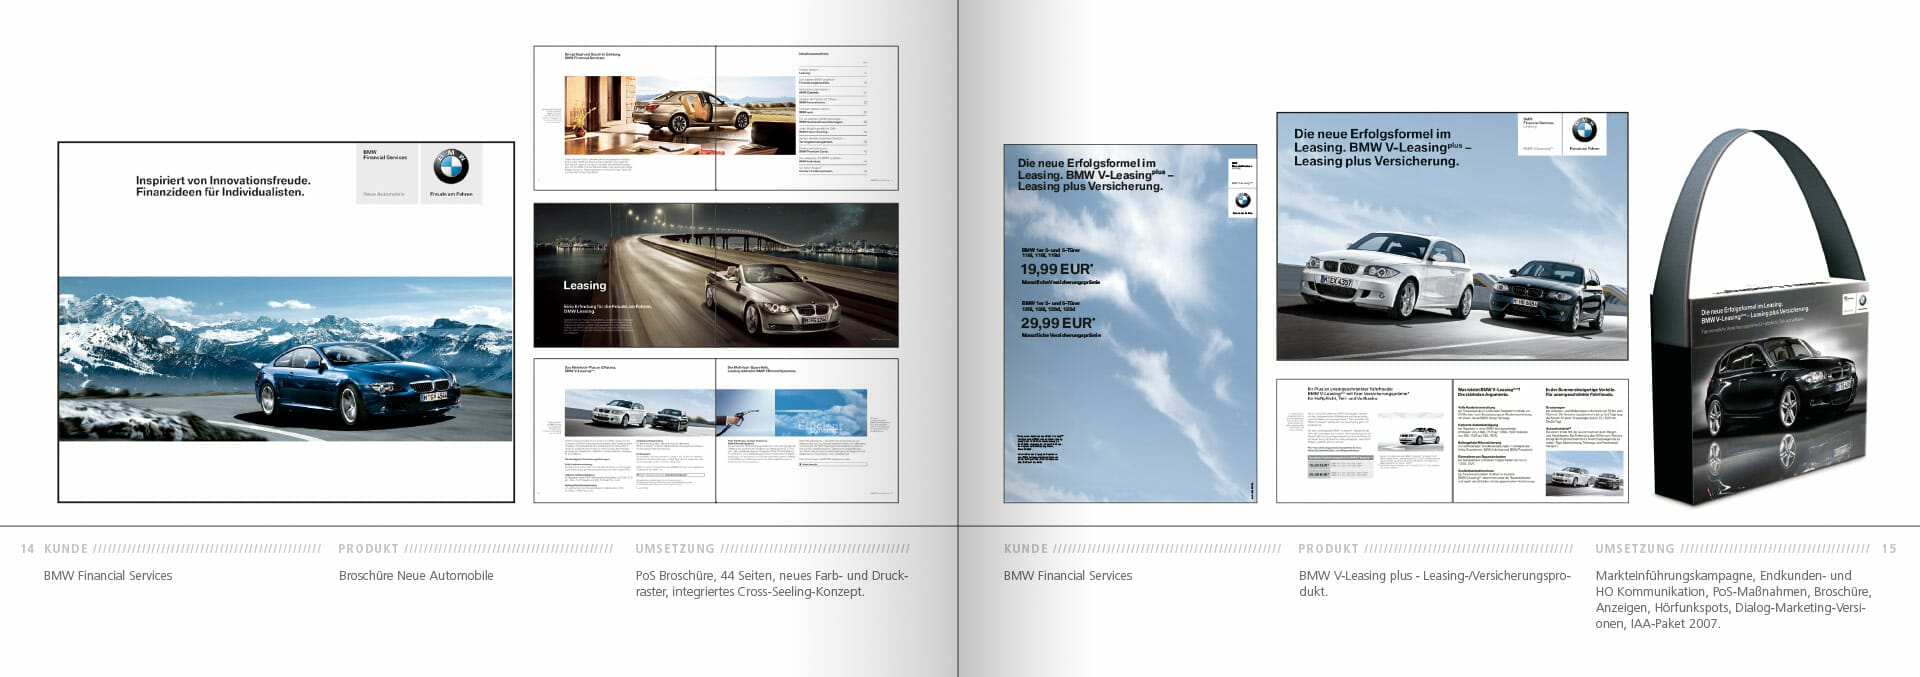 BMW Group Works 2001-2009 Booklet 14-15